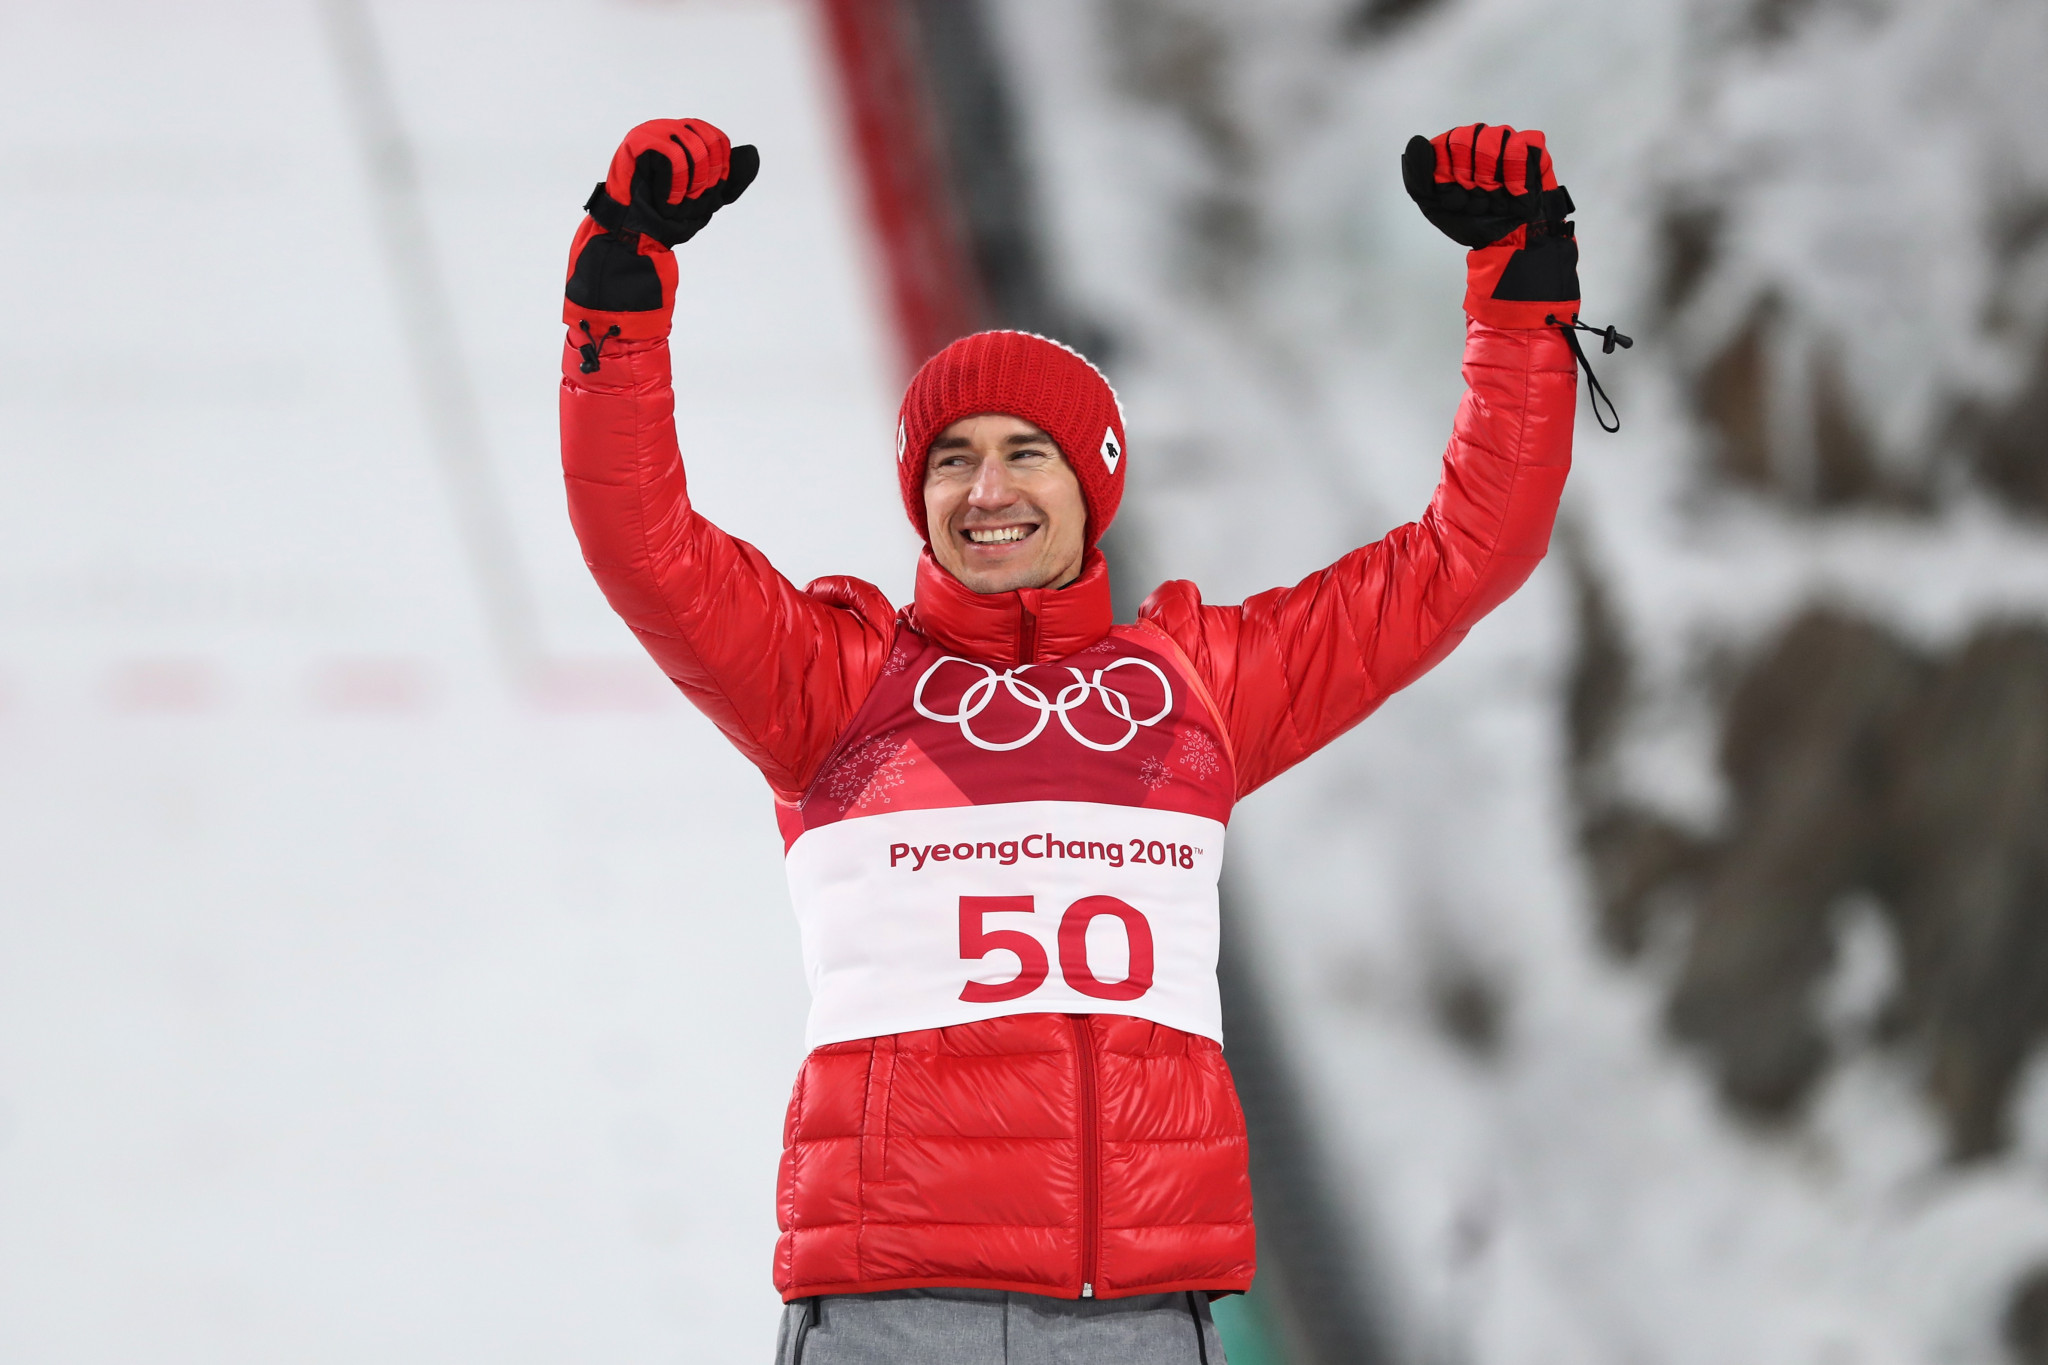 Polish ski jumper Kamil Stoch successfully defended his Olympic men’s large hill individual title today with an assured display at Pyeongchang 2018 ©Getty Images